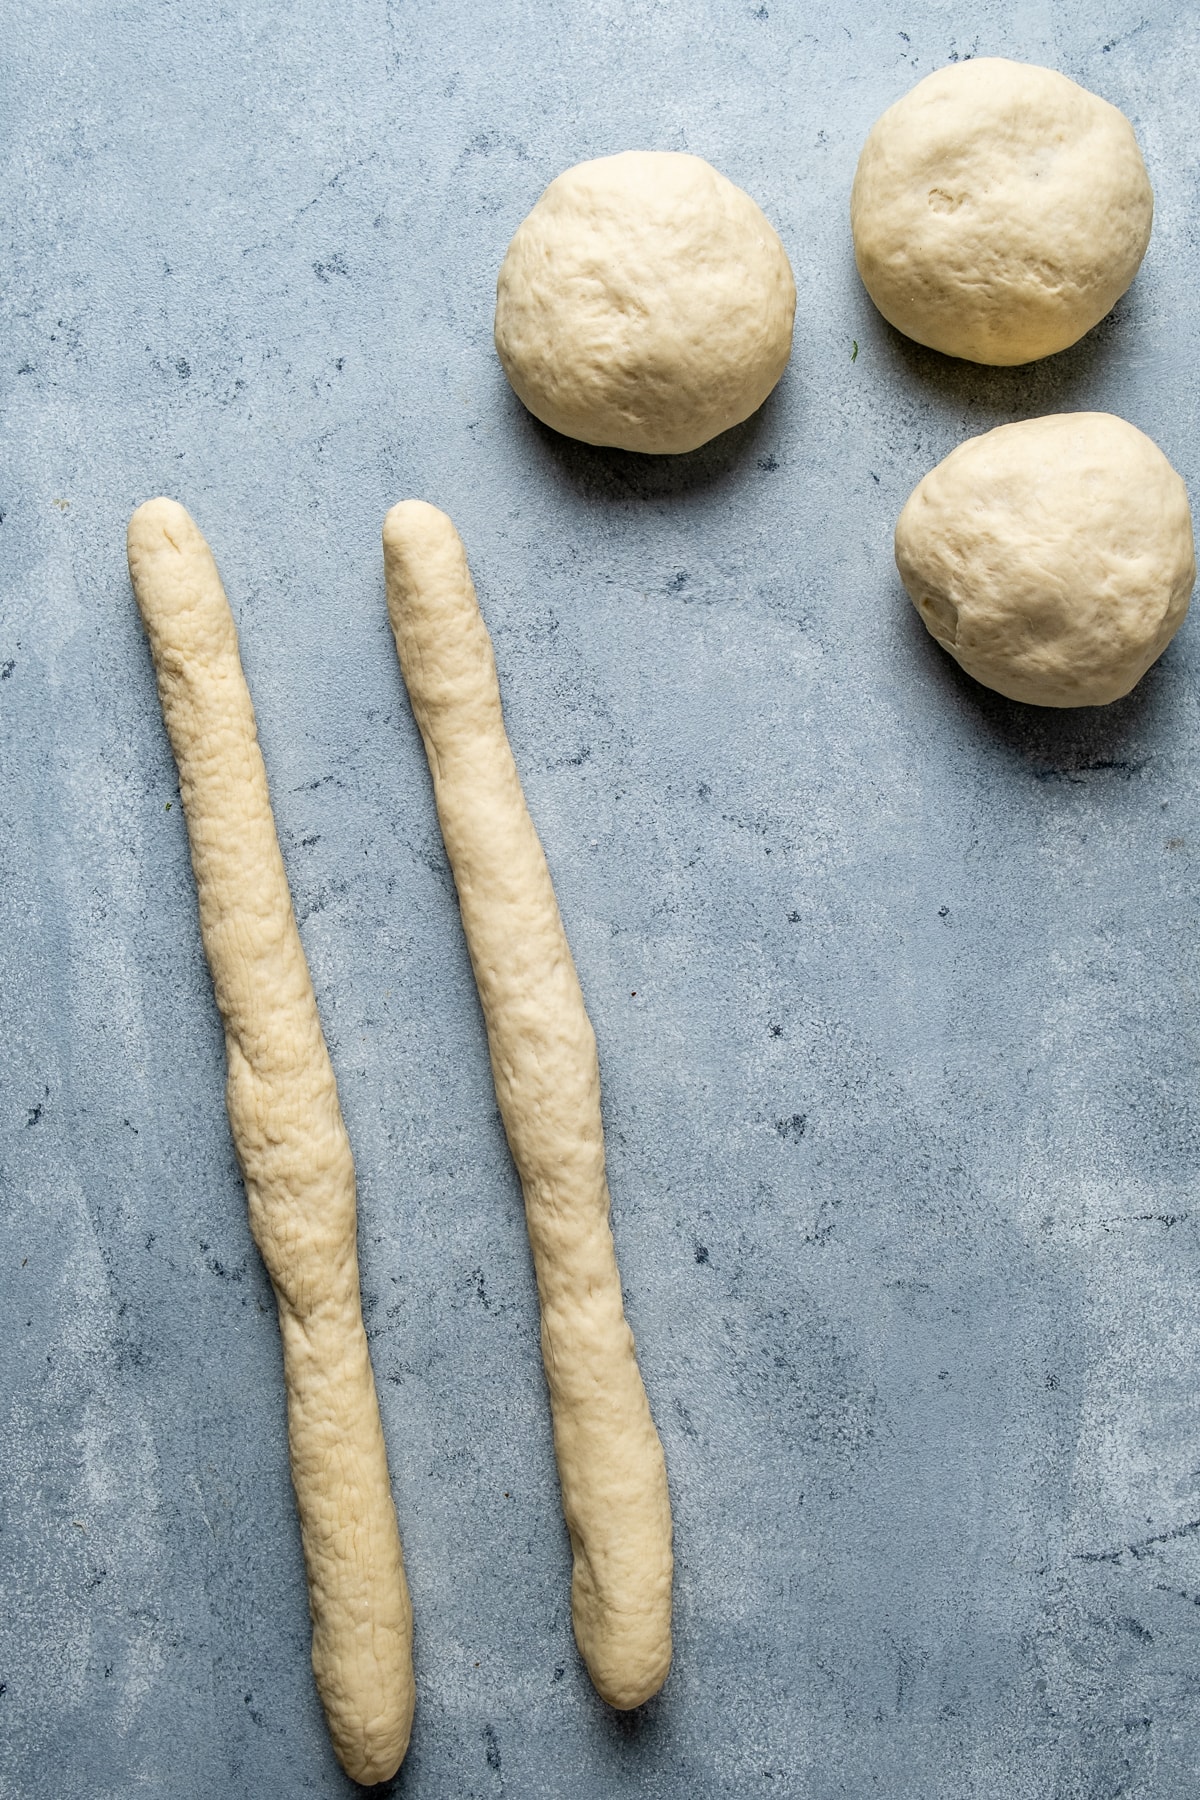 Two strands of dough on a grey background and more dough balls on the side.